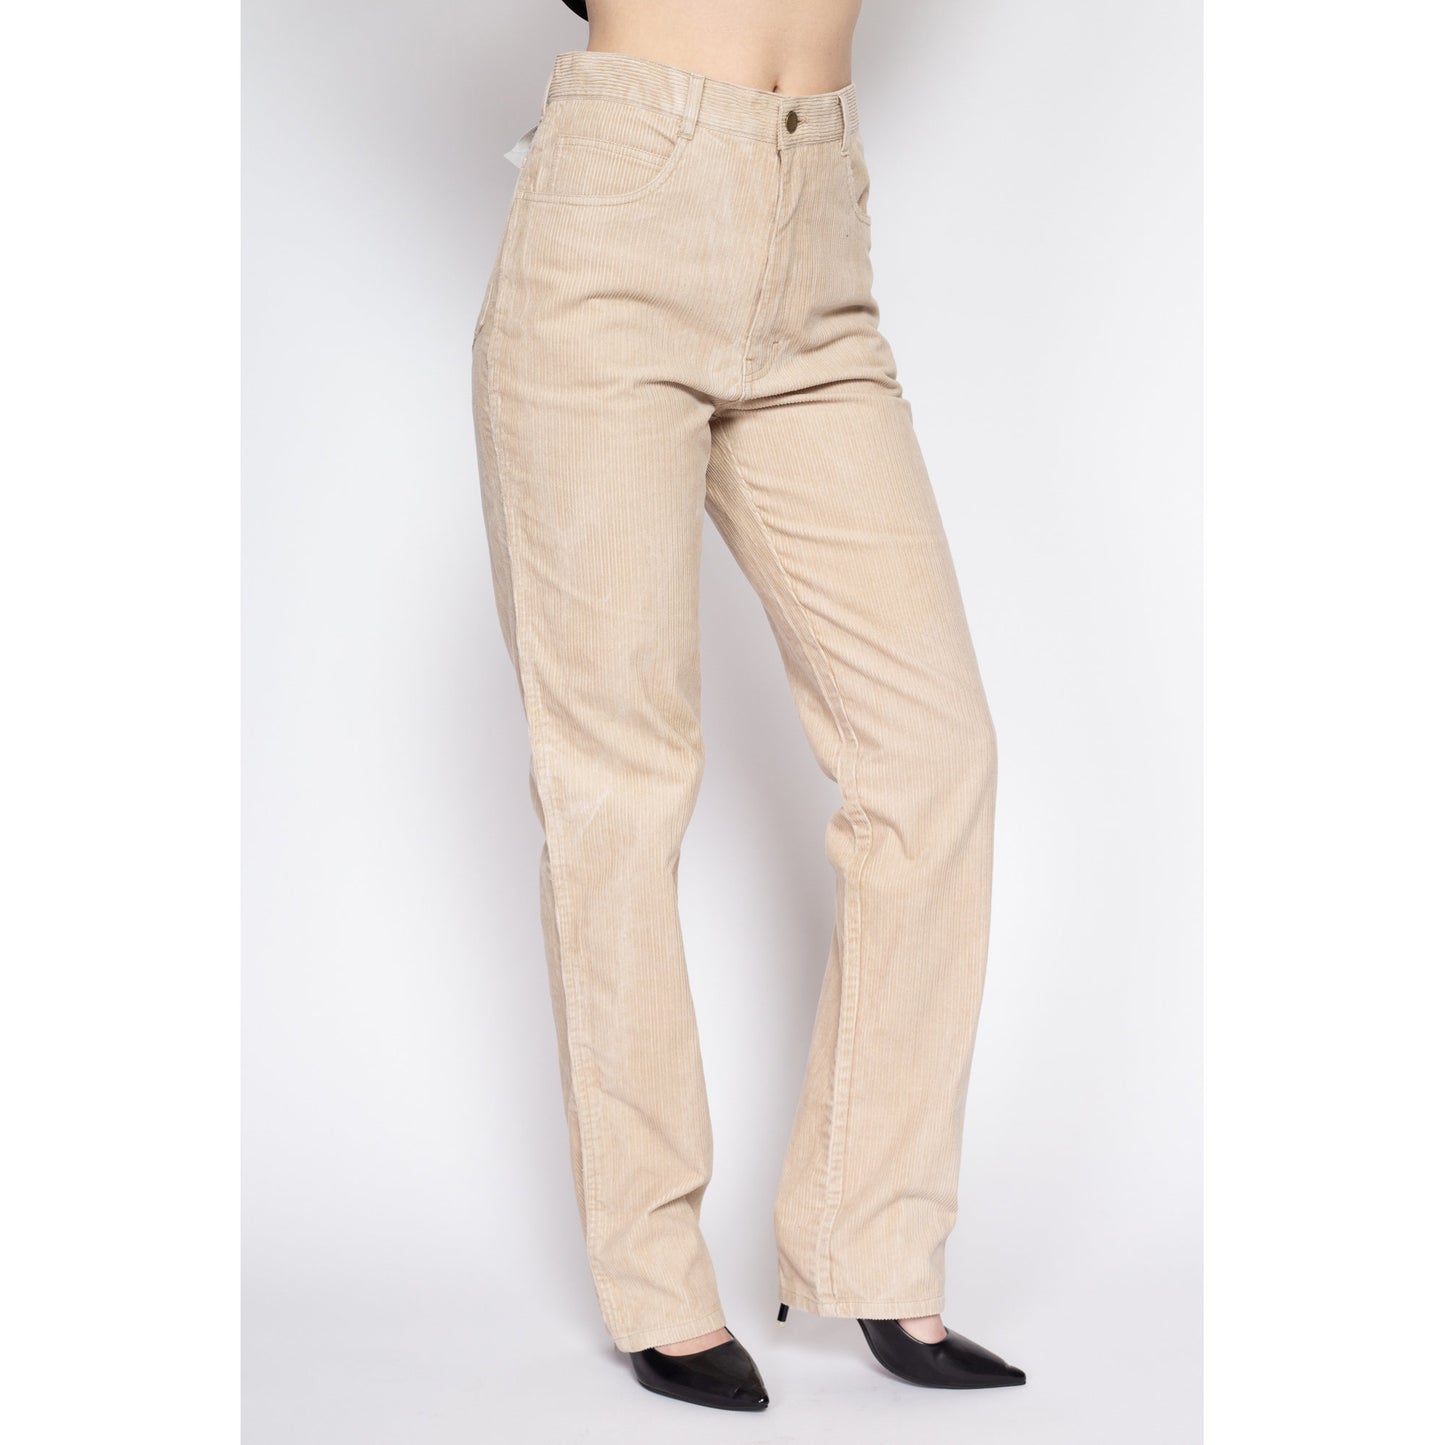 Women's Corduroy Pants: 100+ Items up to −90%